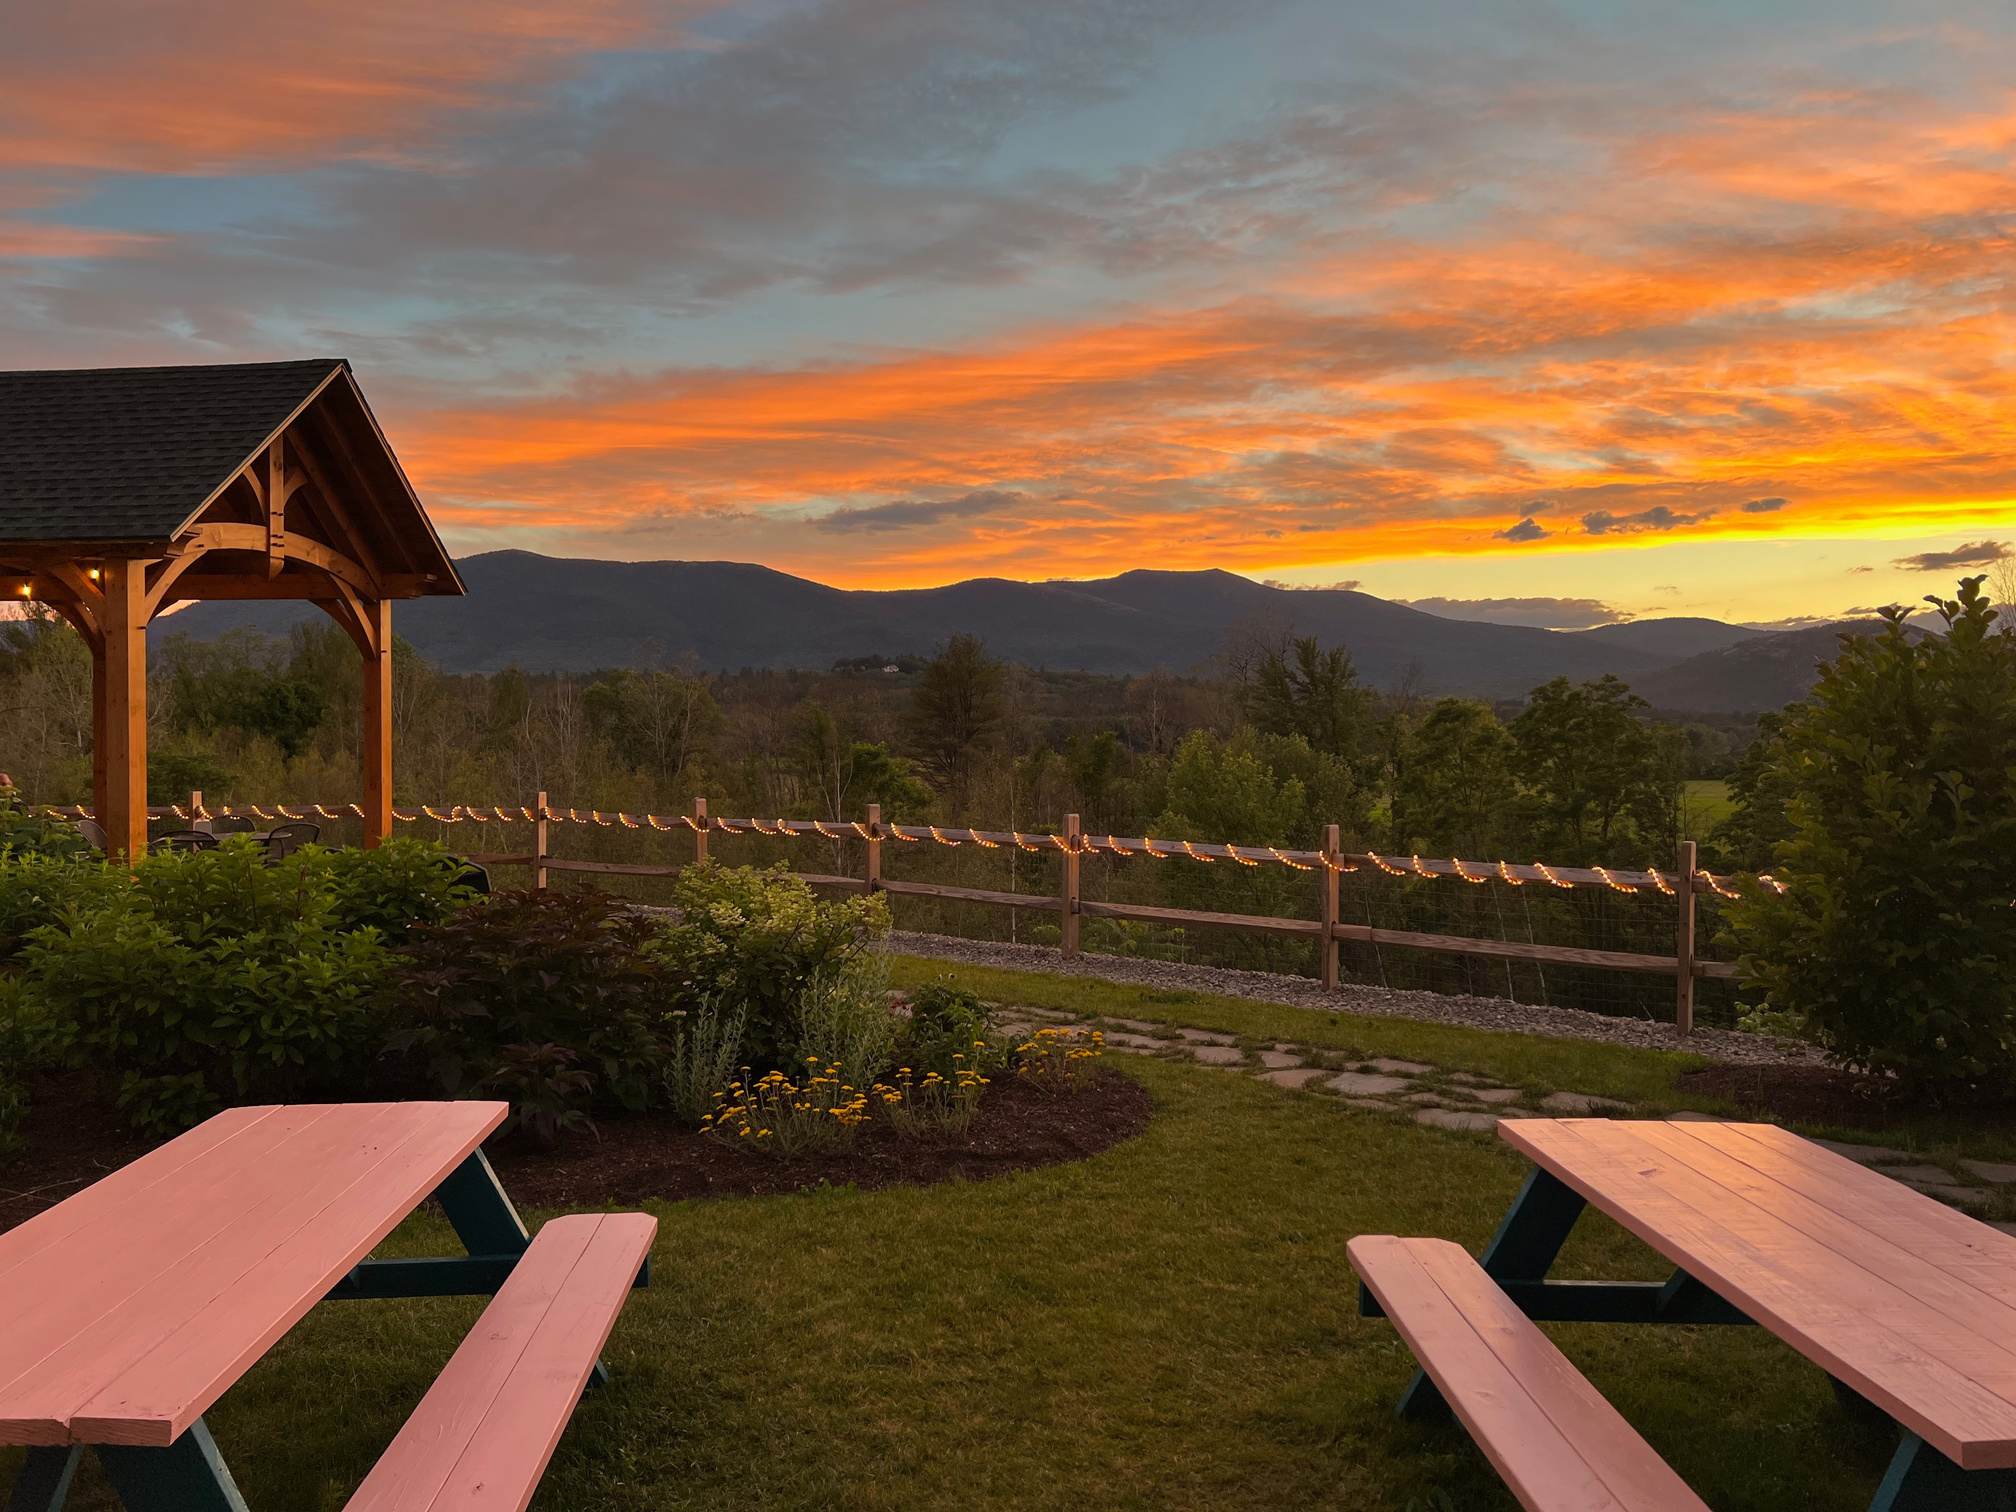 Scenic sunset view of the White Mountains from the patio at The Christmas Loft and Tricks And Treats located at 2028 White Mountain Highway North Conway NH. Featuring picnic tables, gardens, and coverage.